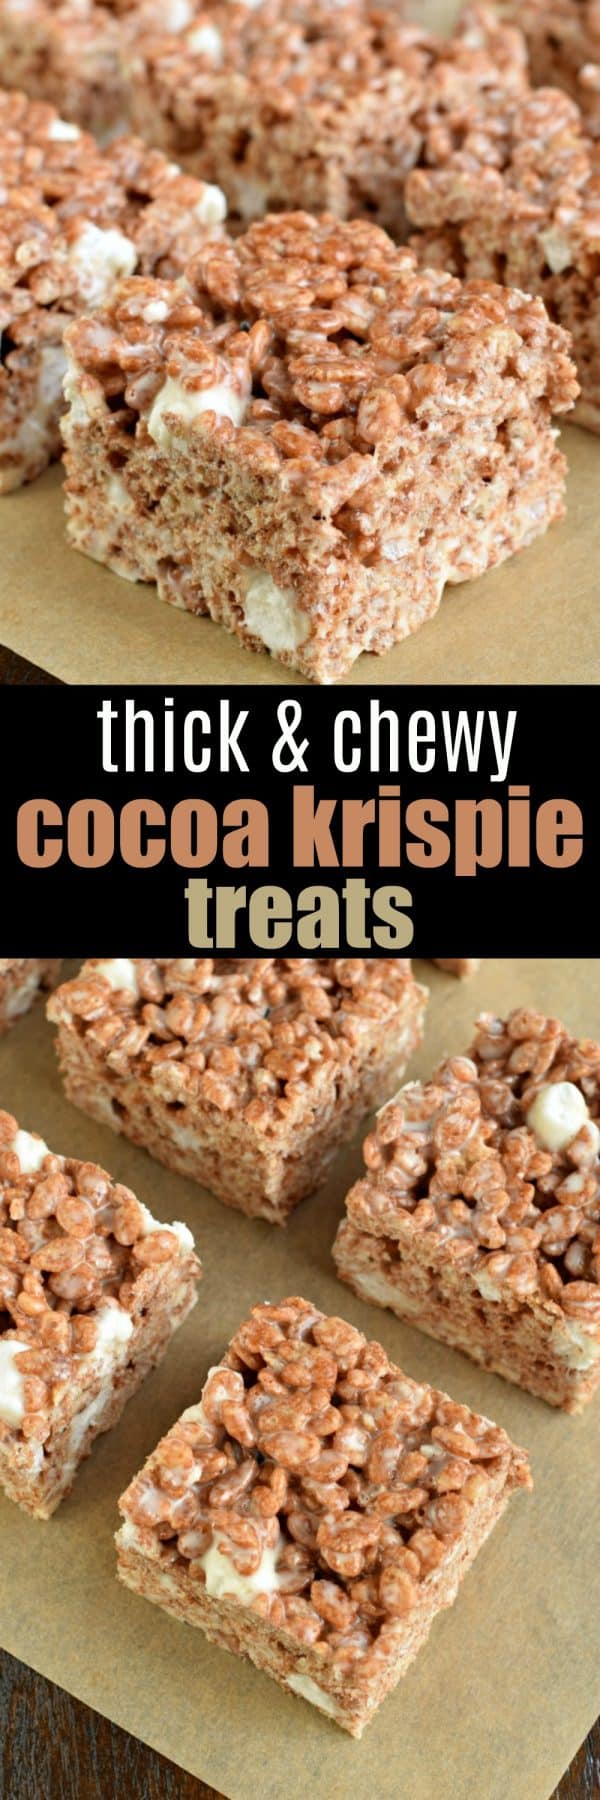 Get the tips and tricks to making the most PERFECT Cocoa Krispie Treats. Kid and adult friendly! THICK AND CHEWY! #cocoakrispietreats #chocolate